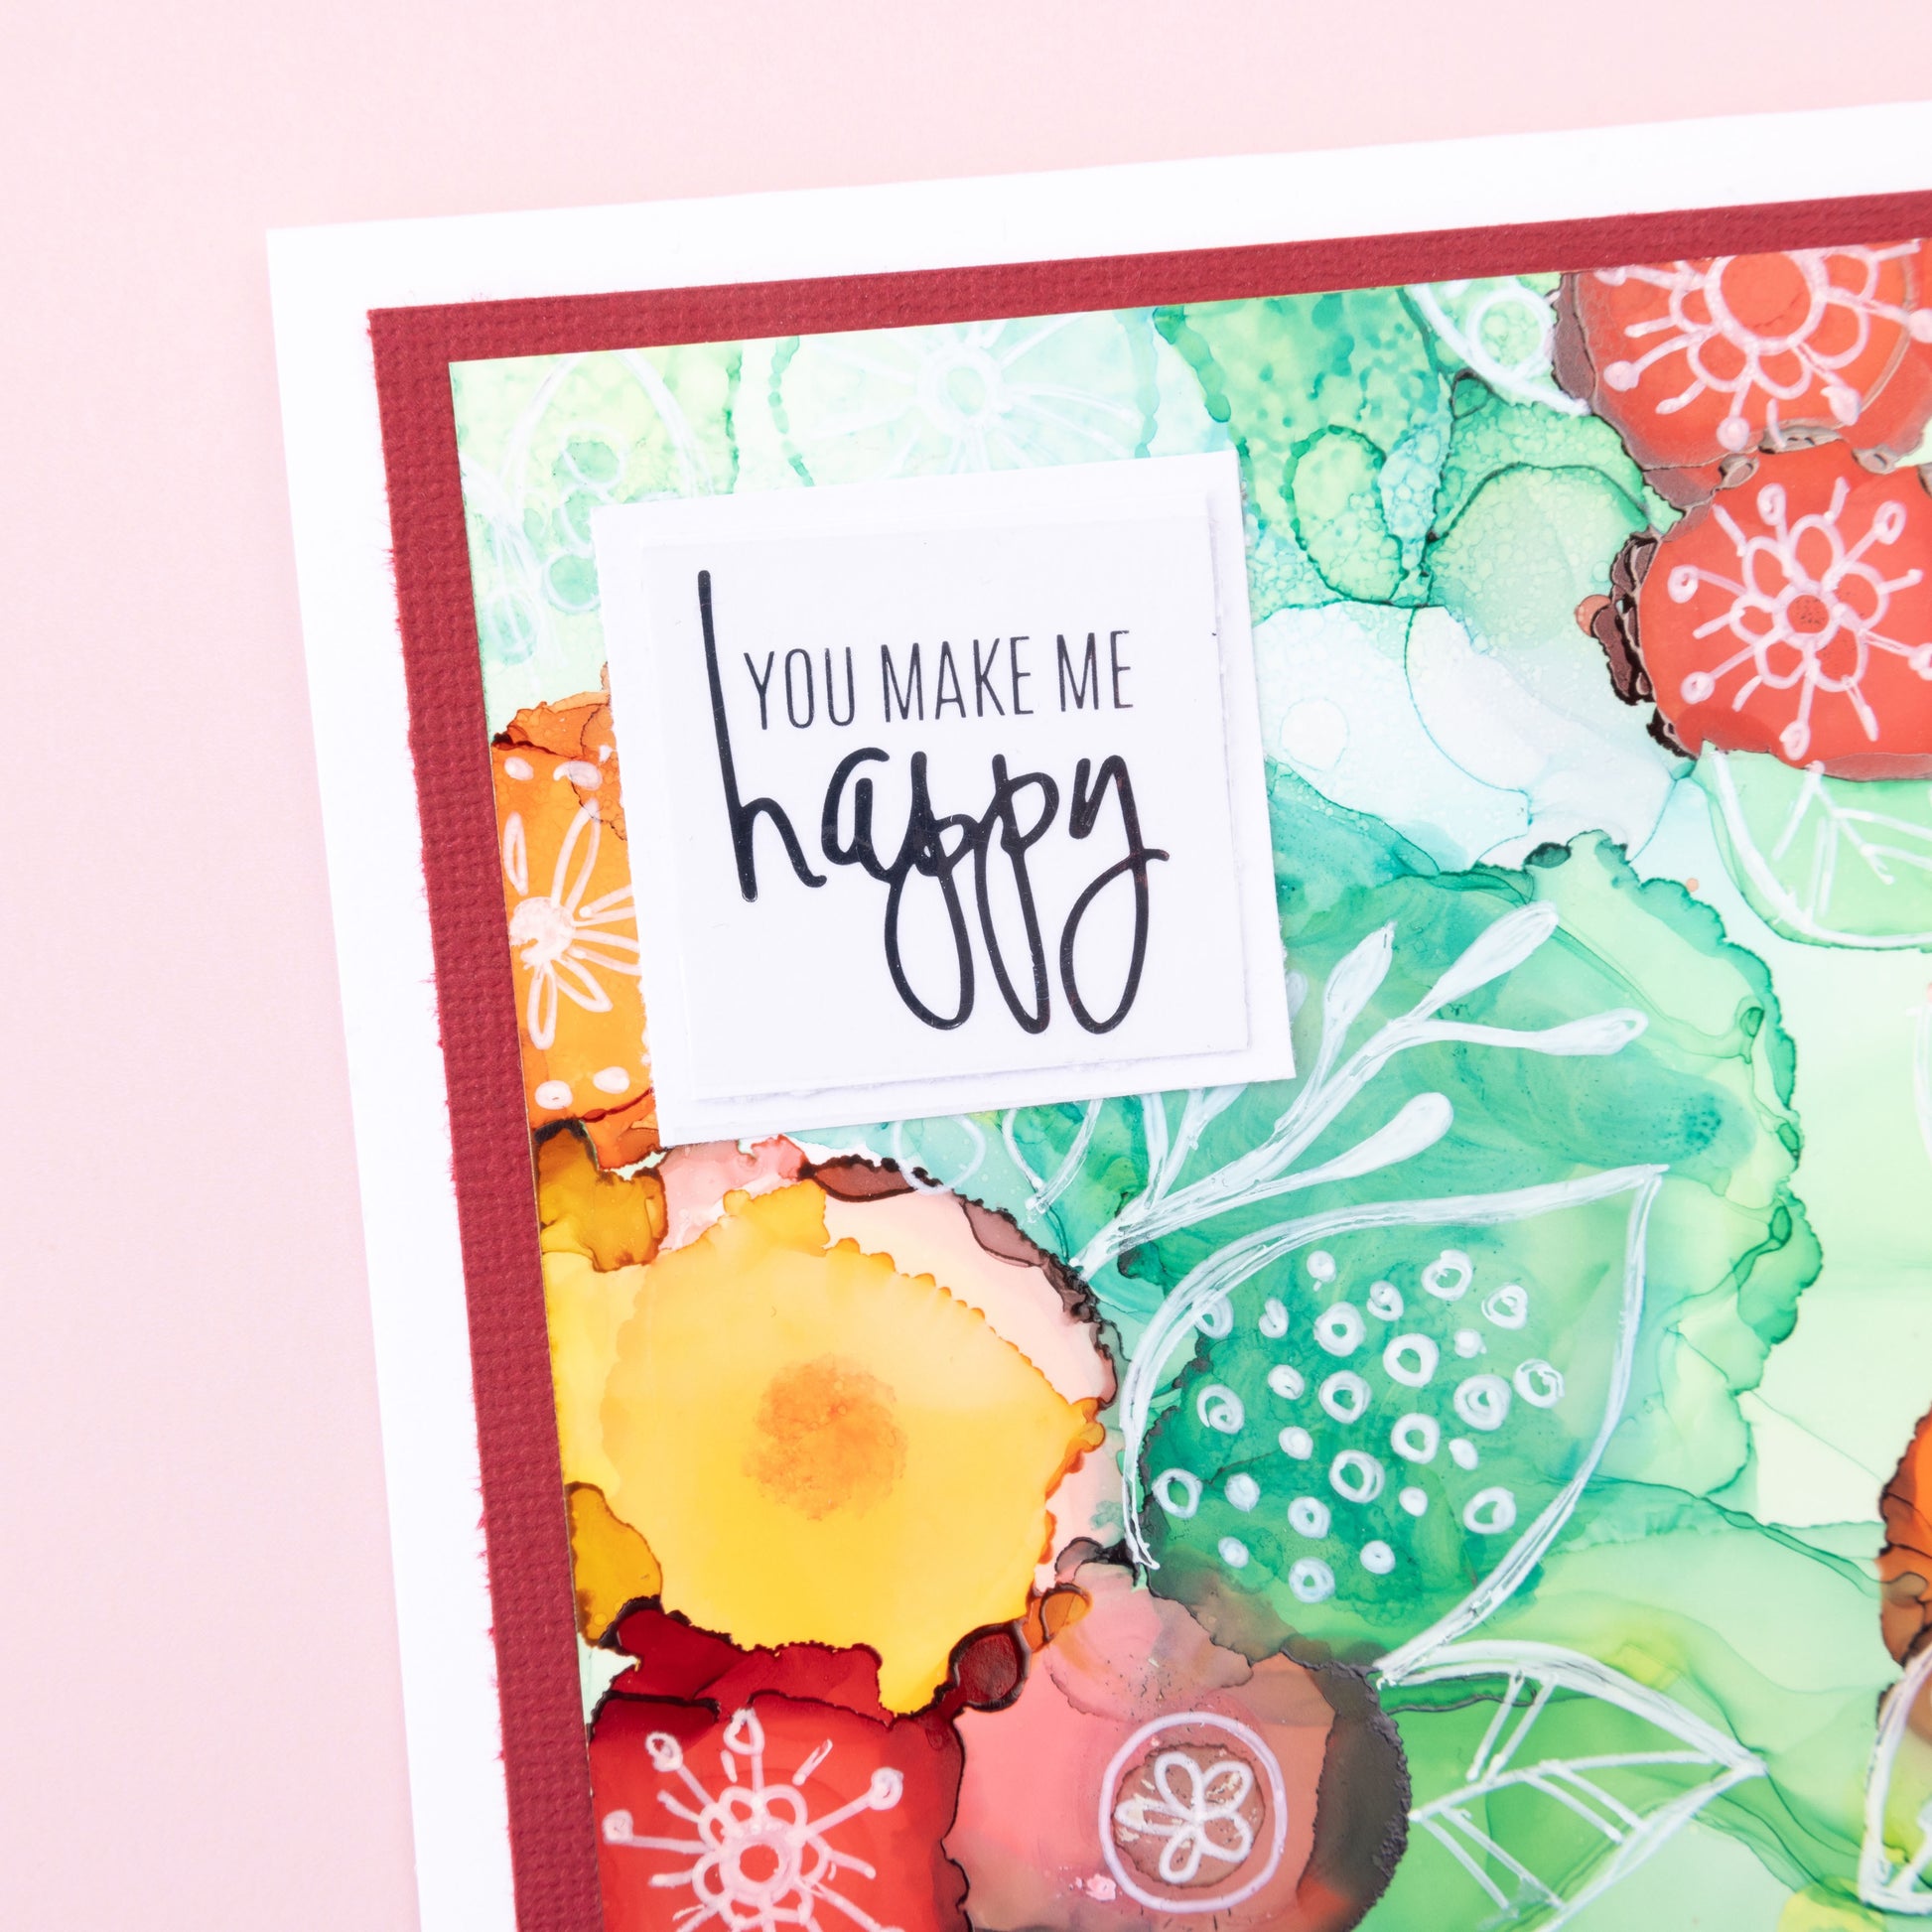 Alcohol Ink Art Supplies – Happily Ever Crafty